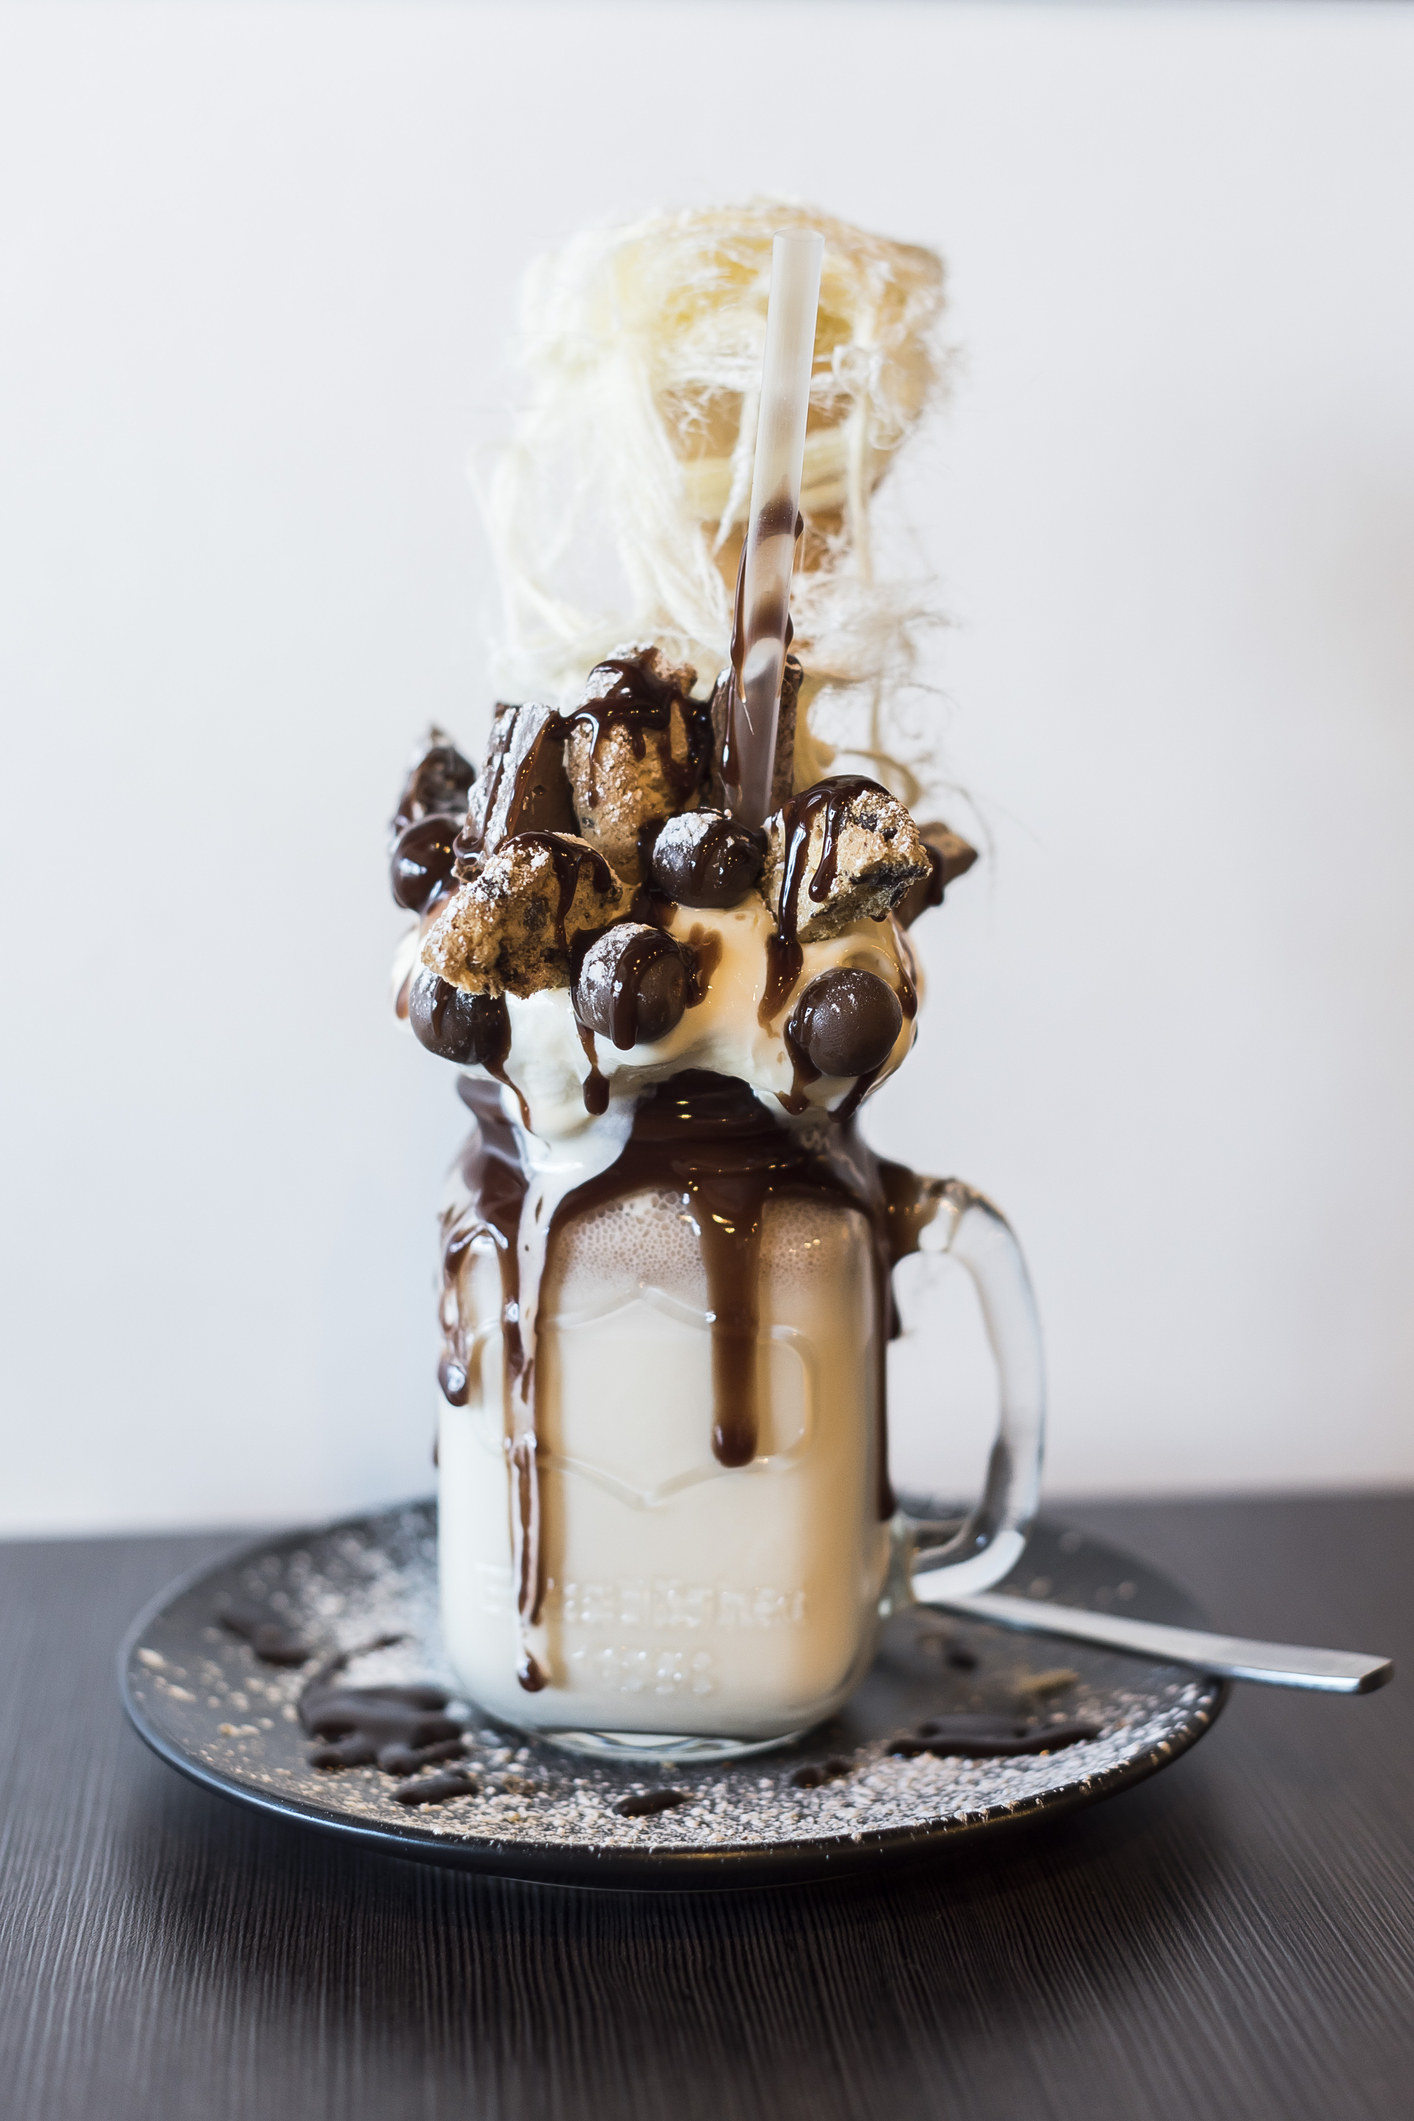 A milkshake with lots of syrup